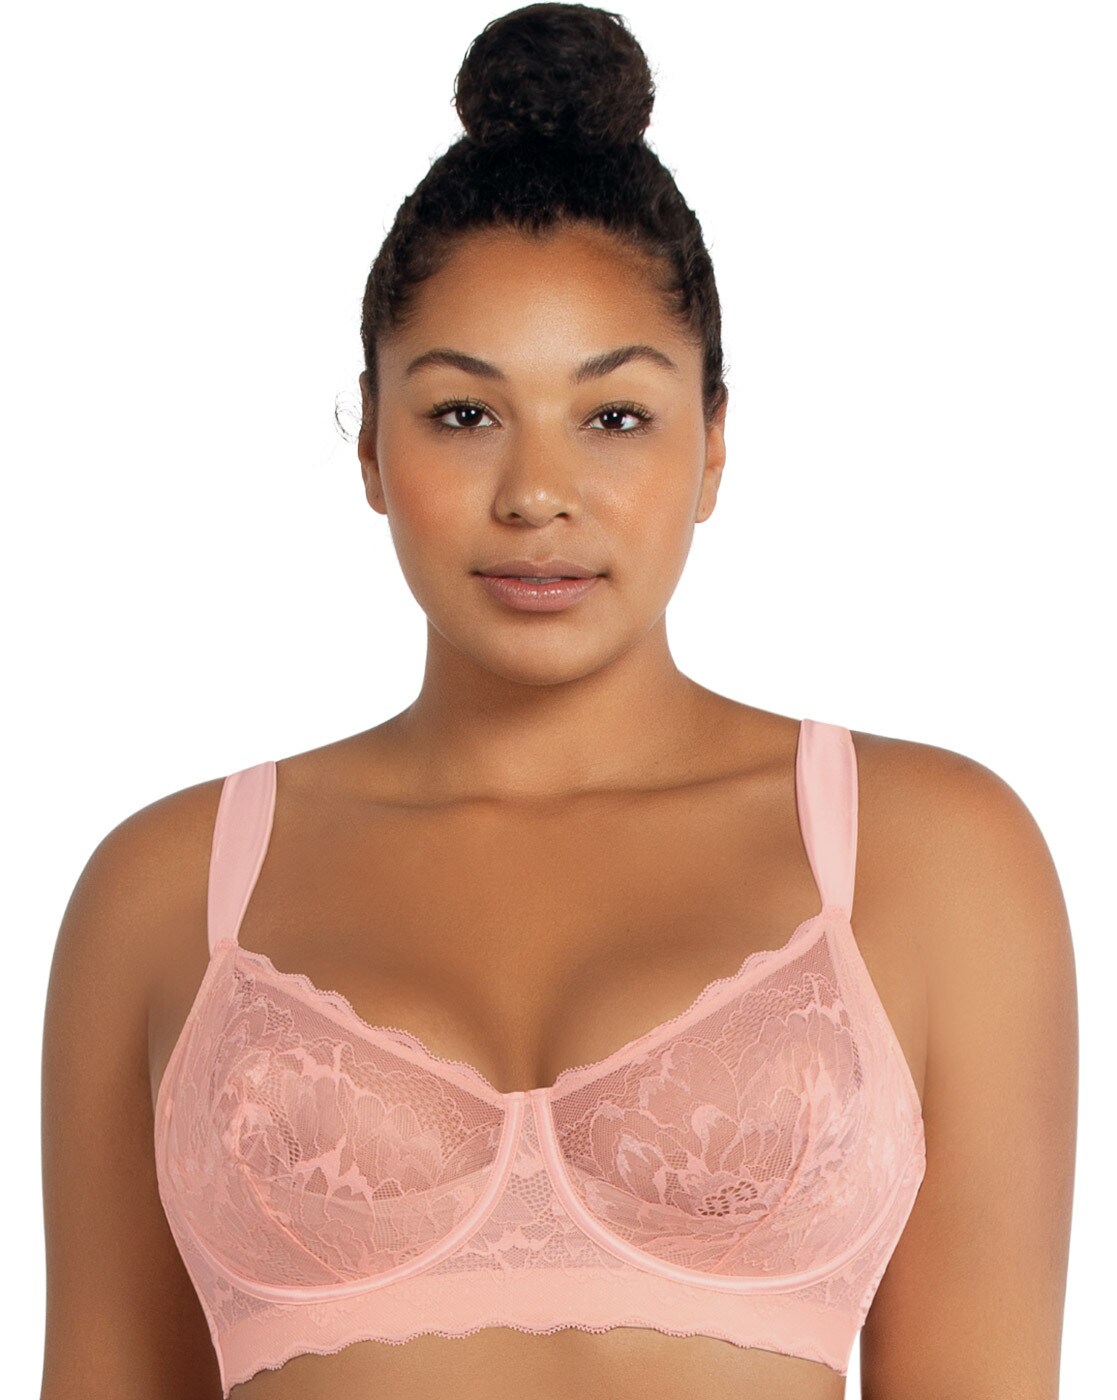 Buy Padded Non-Wired Full Cup Bra in Peach Colour - Lace Online